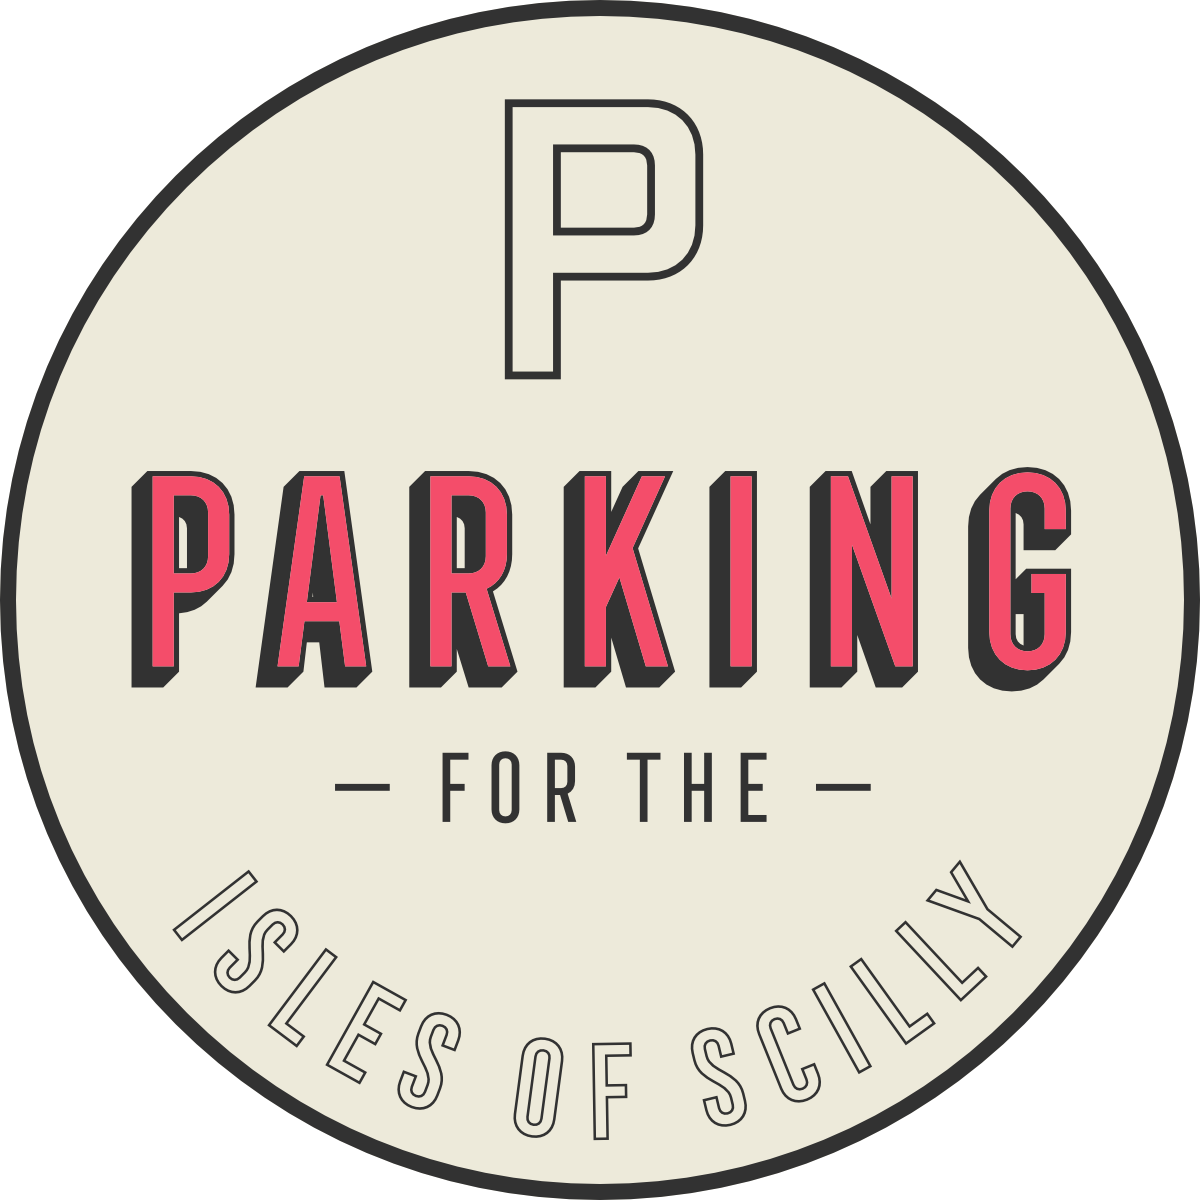 Parking for the Isles of Scilly